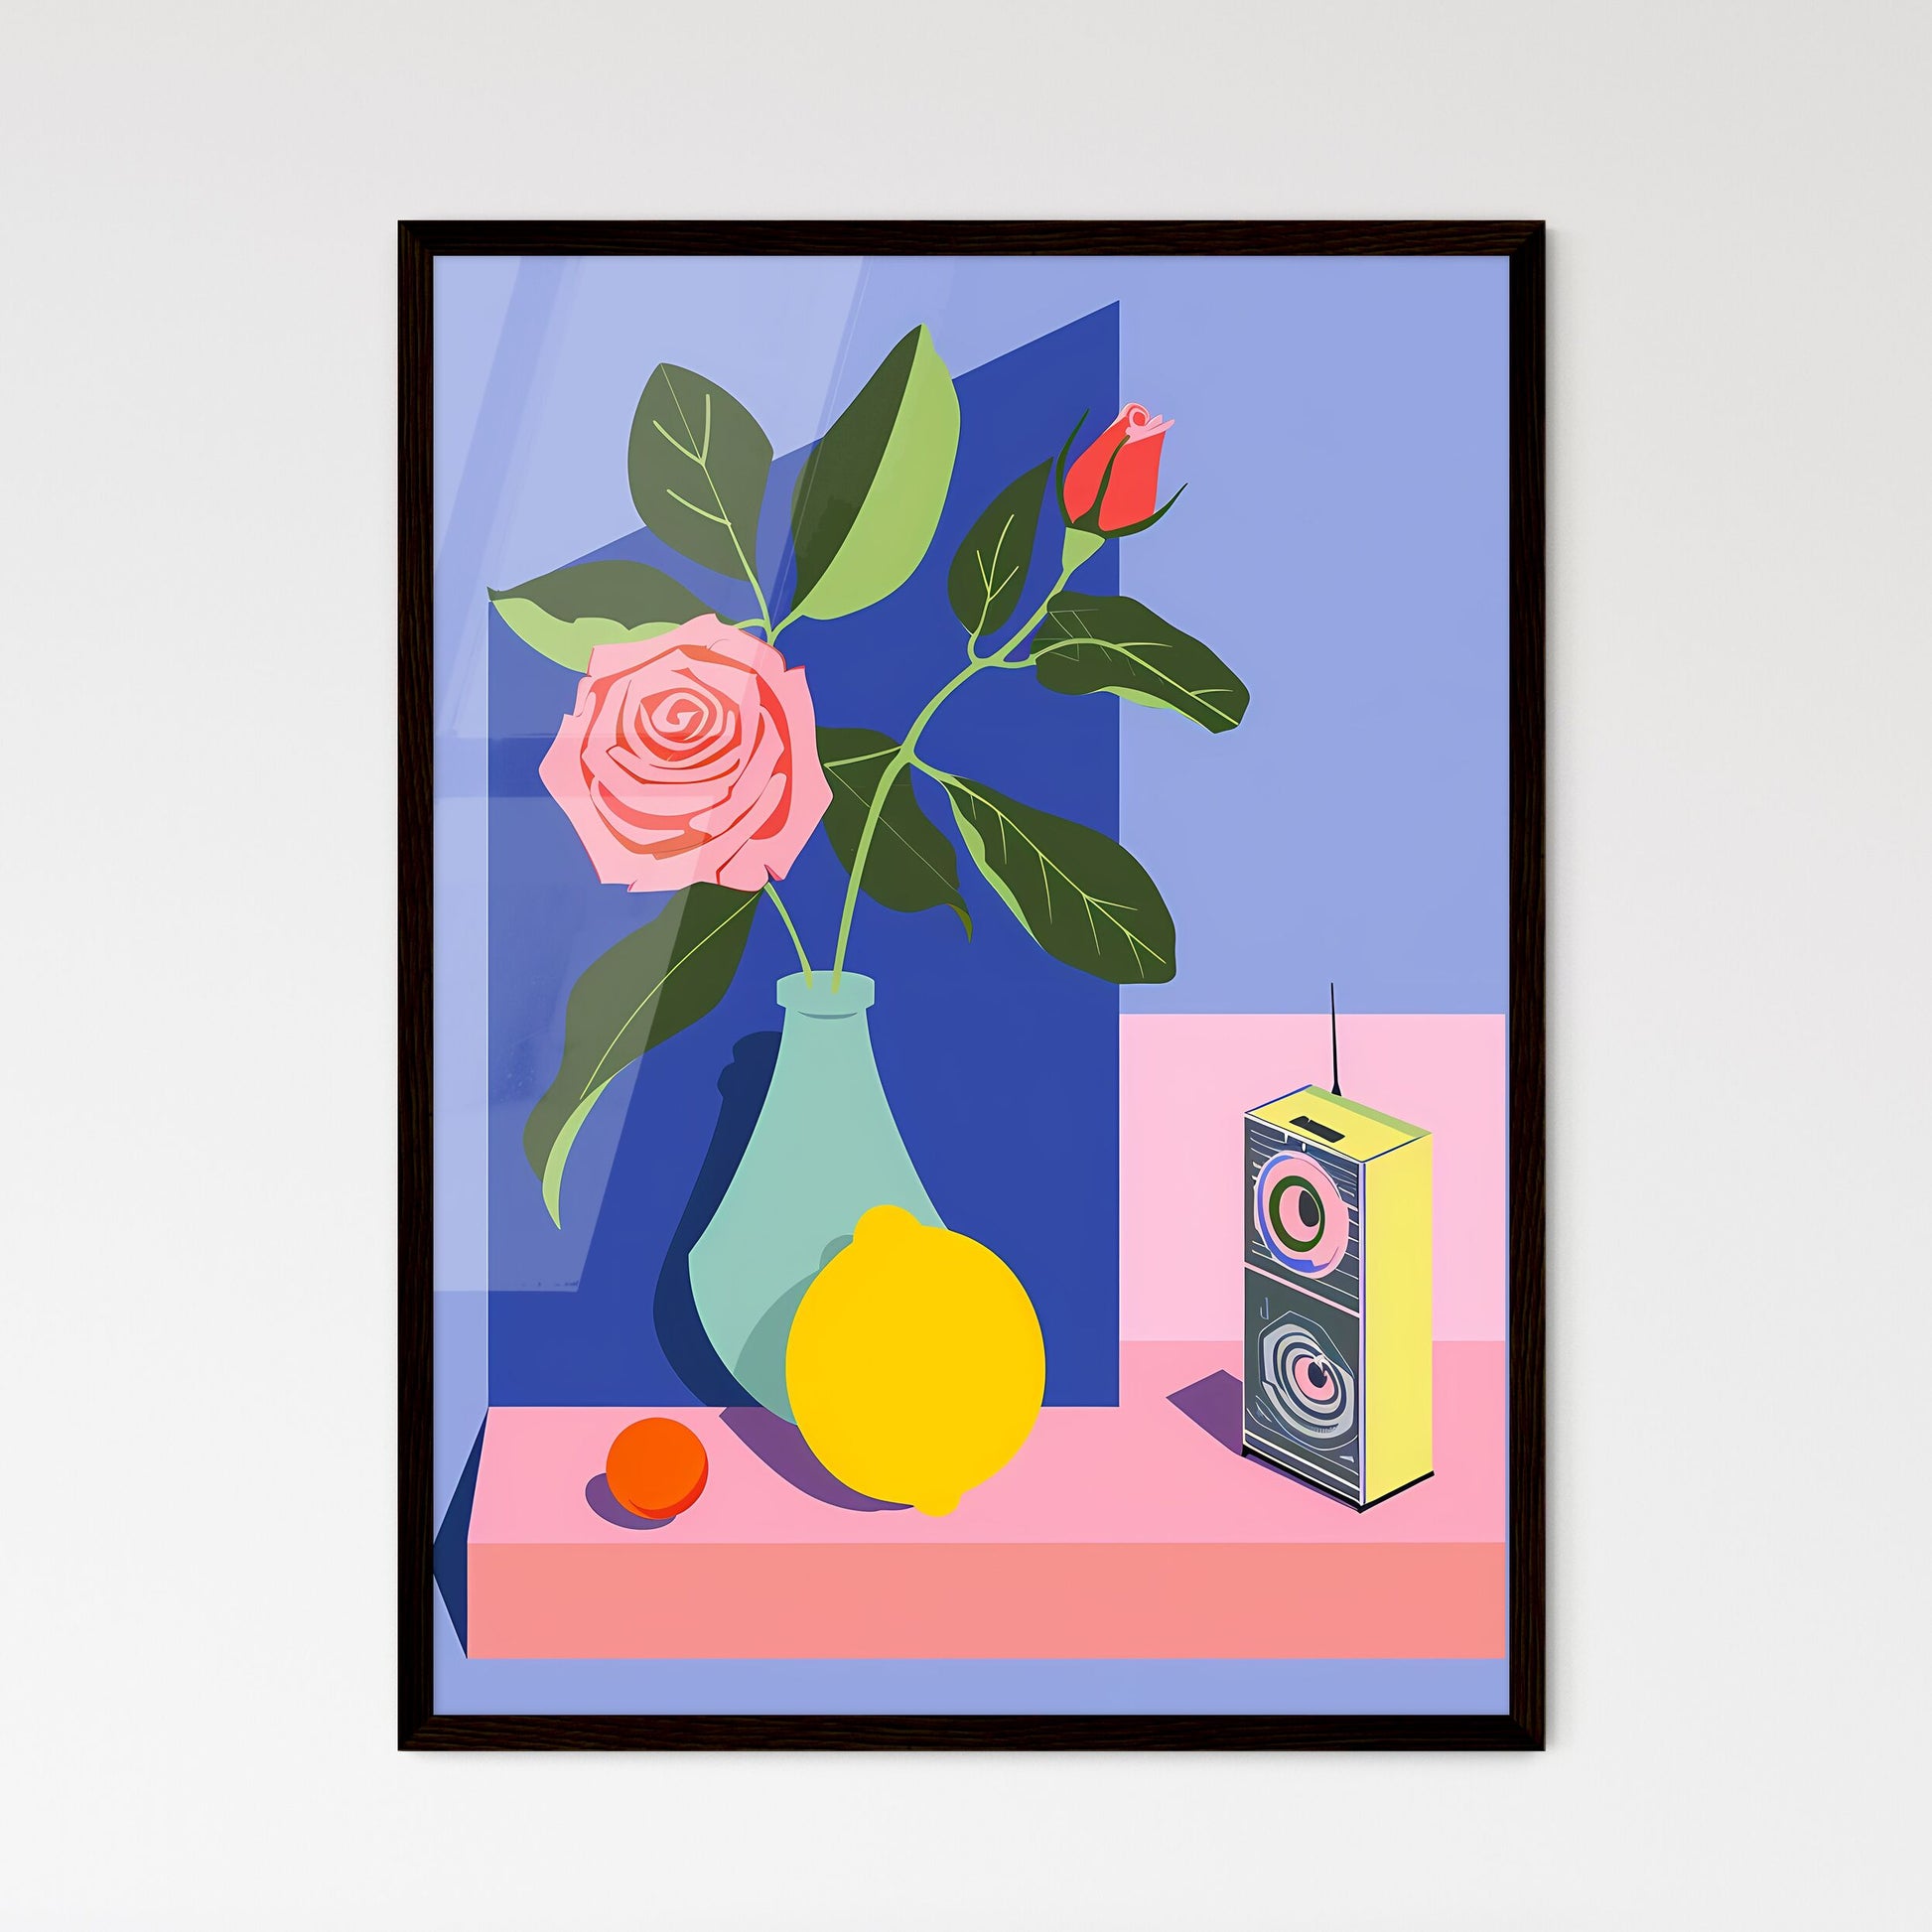 Indie risograph fine art print, lemon and rose still life, geometric shapes, blue background, pop art, minimal, defined outlines and shadowing Default Title